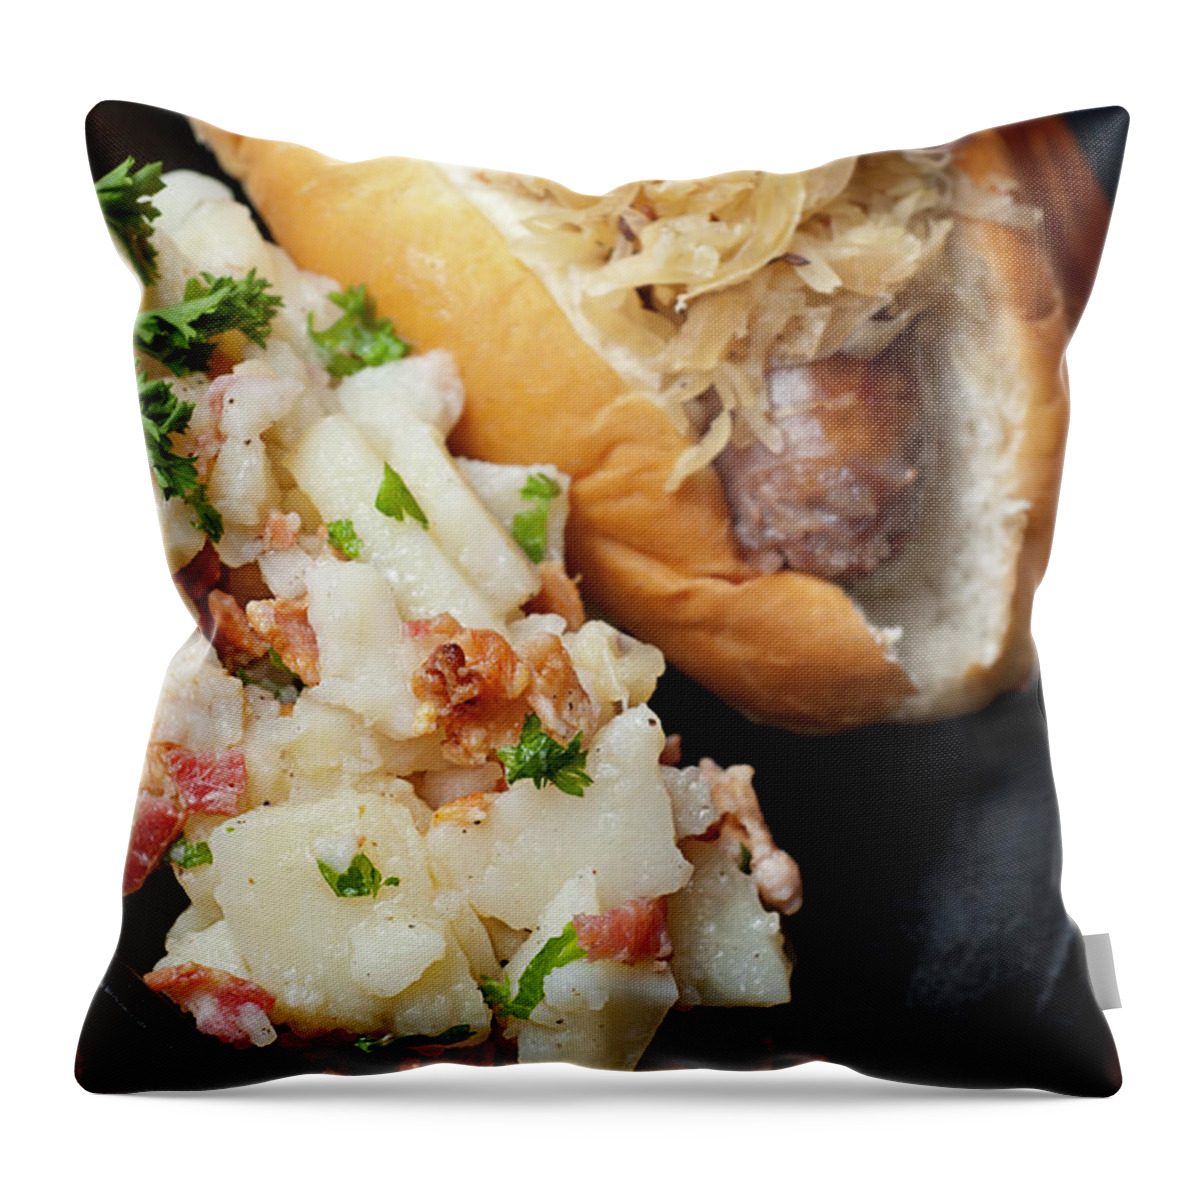 German Food Throw Pillow featuring the photograph Delicious German Potato Salad And Bread by Rudisill